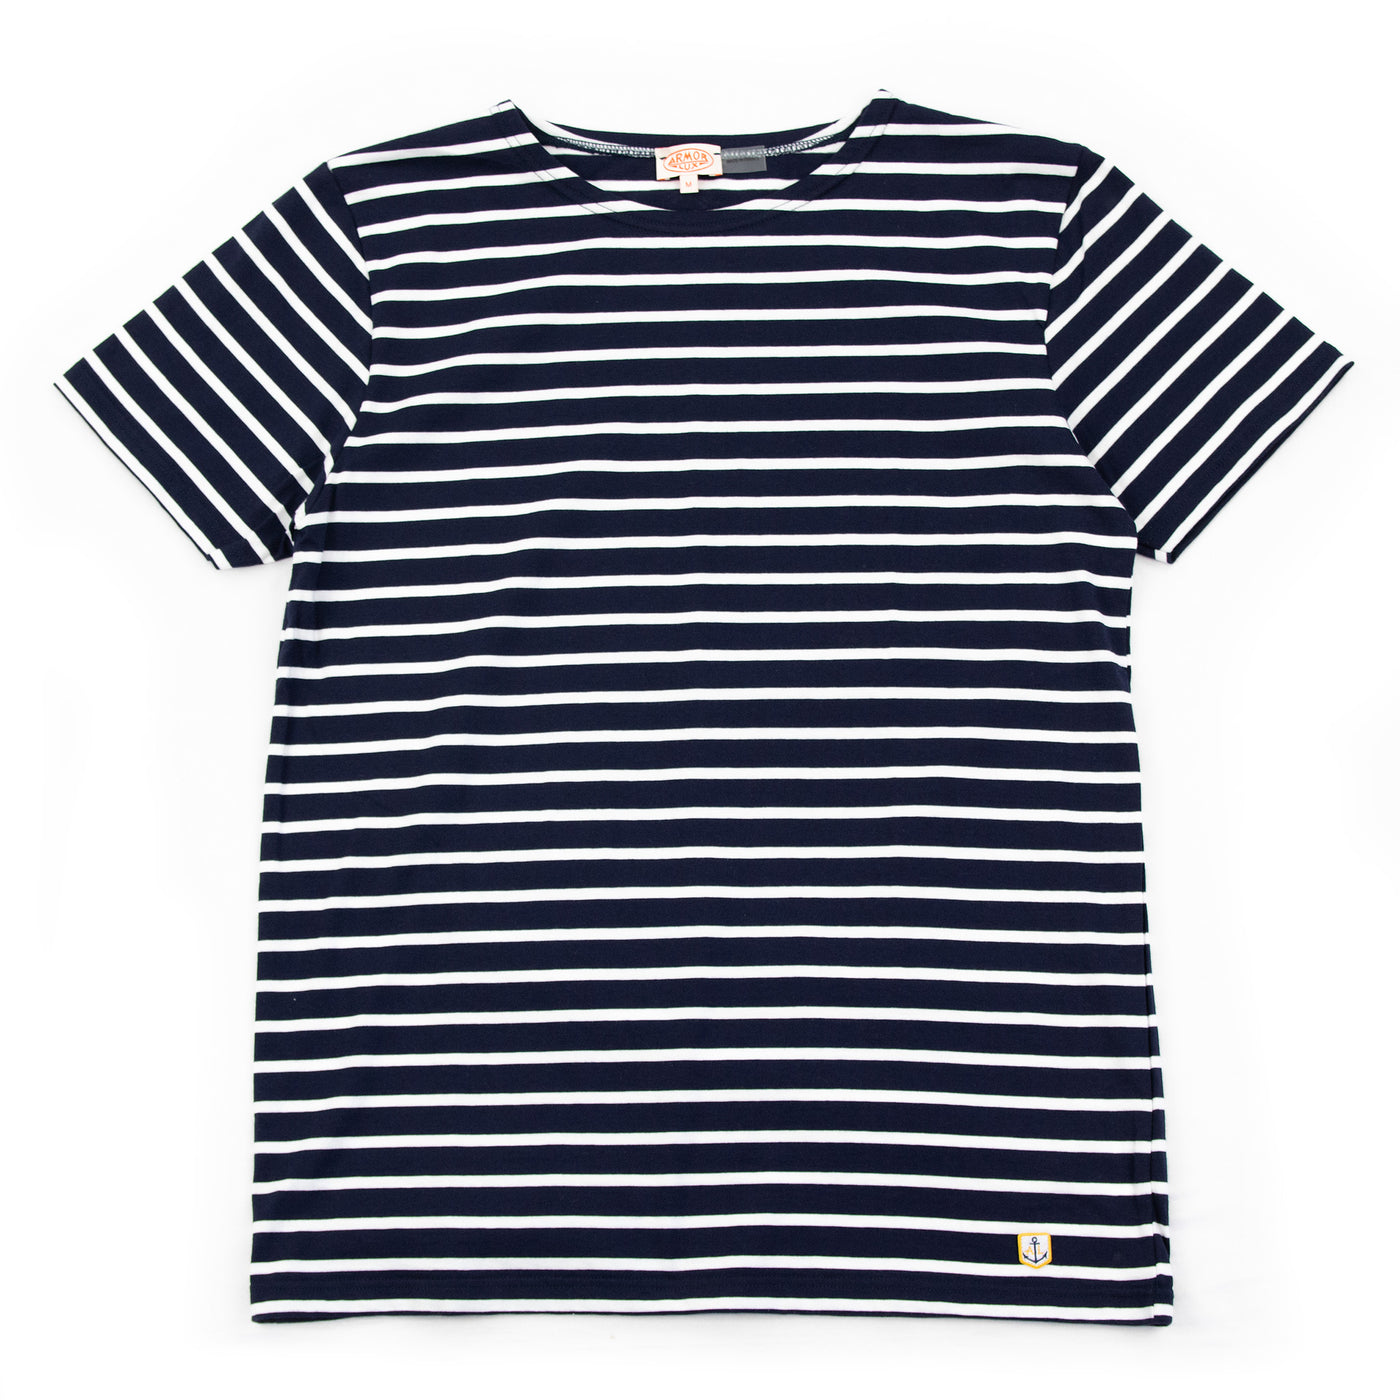 Armor Lux Sailor Mariniere Hoedic T-Shirt Navy / White Front